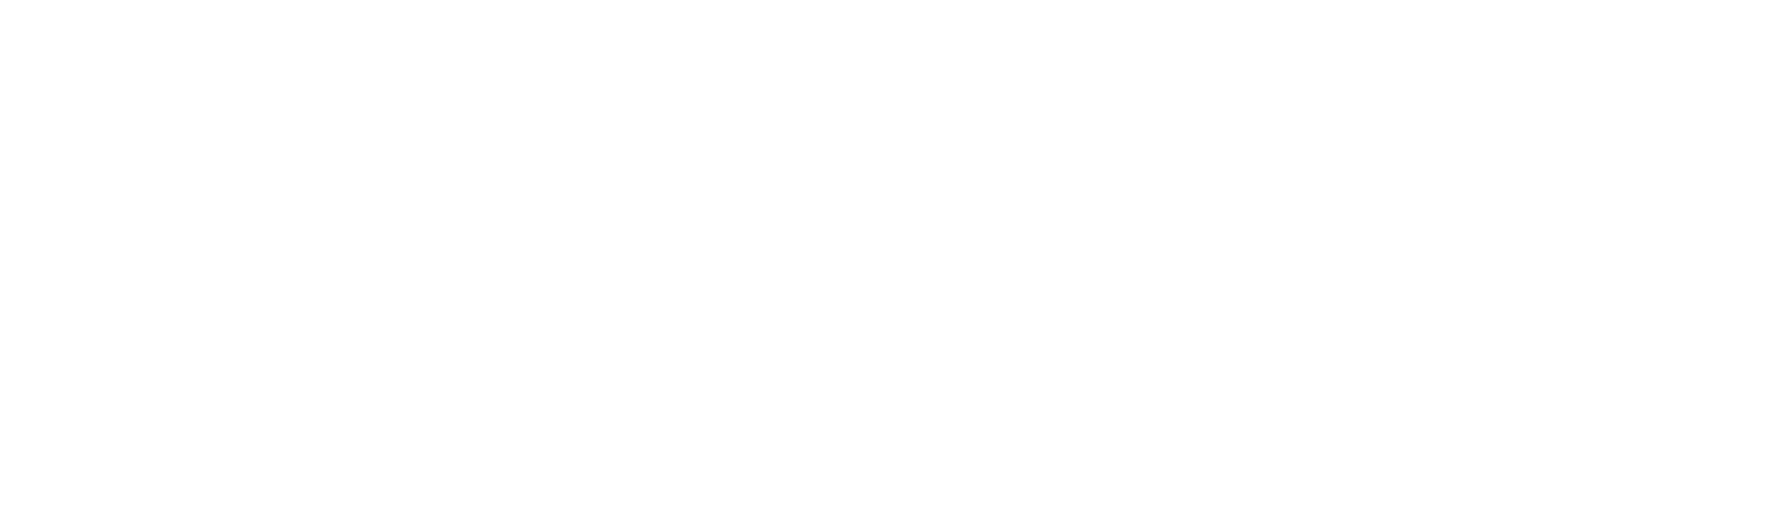 Title: The future of humanity